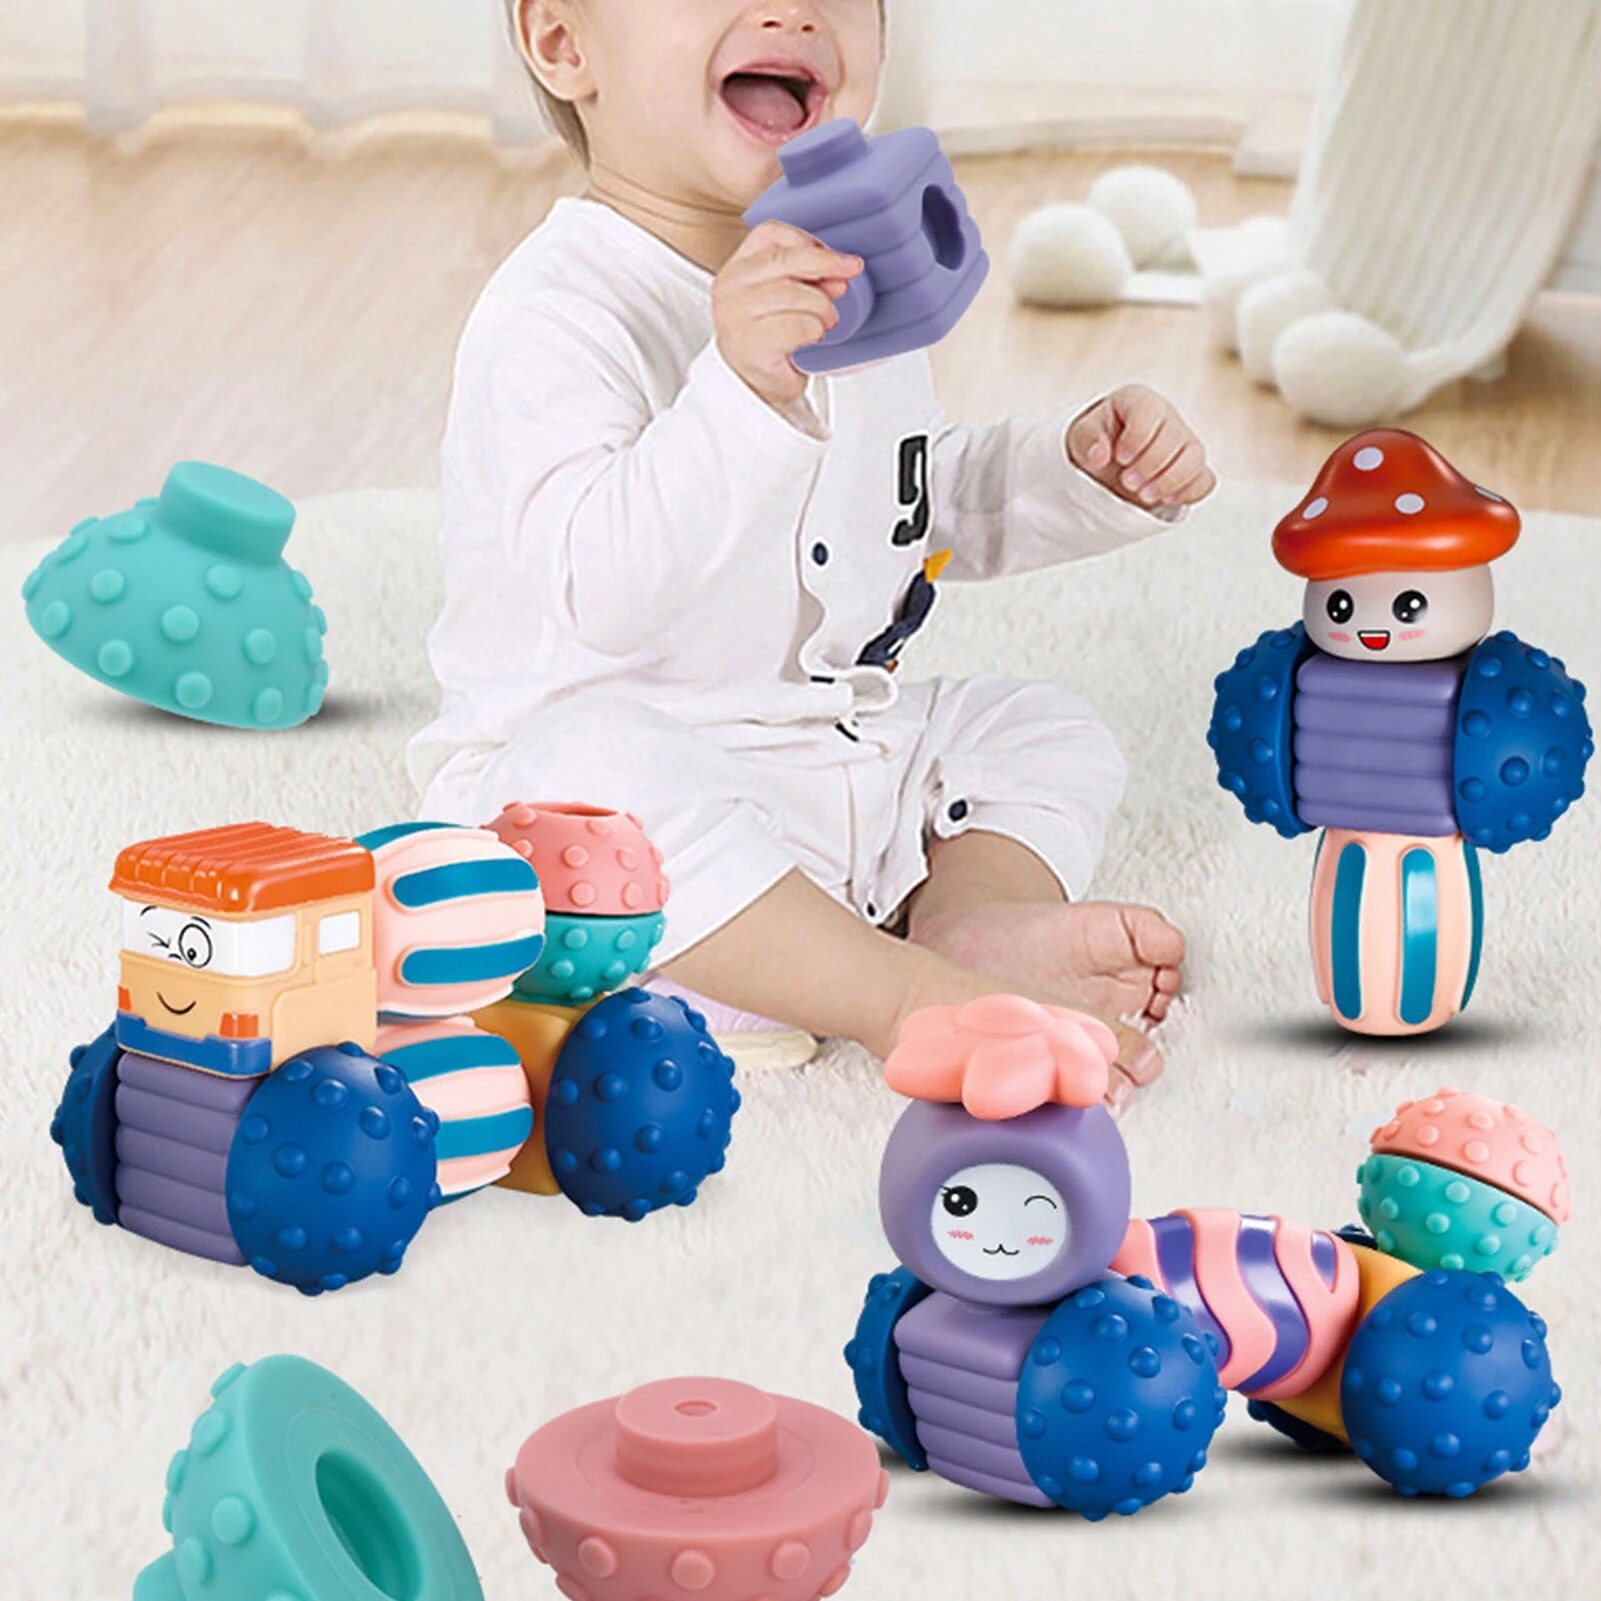 Baby Sensory Toys DIY Building Blocks Grasp Toy 3D Silicone Building Blocks Soft Ball Kid Rubber Bath Teethers Baby Puzzle Toy